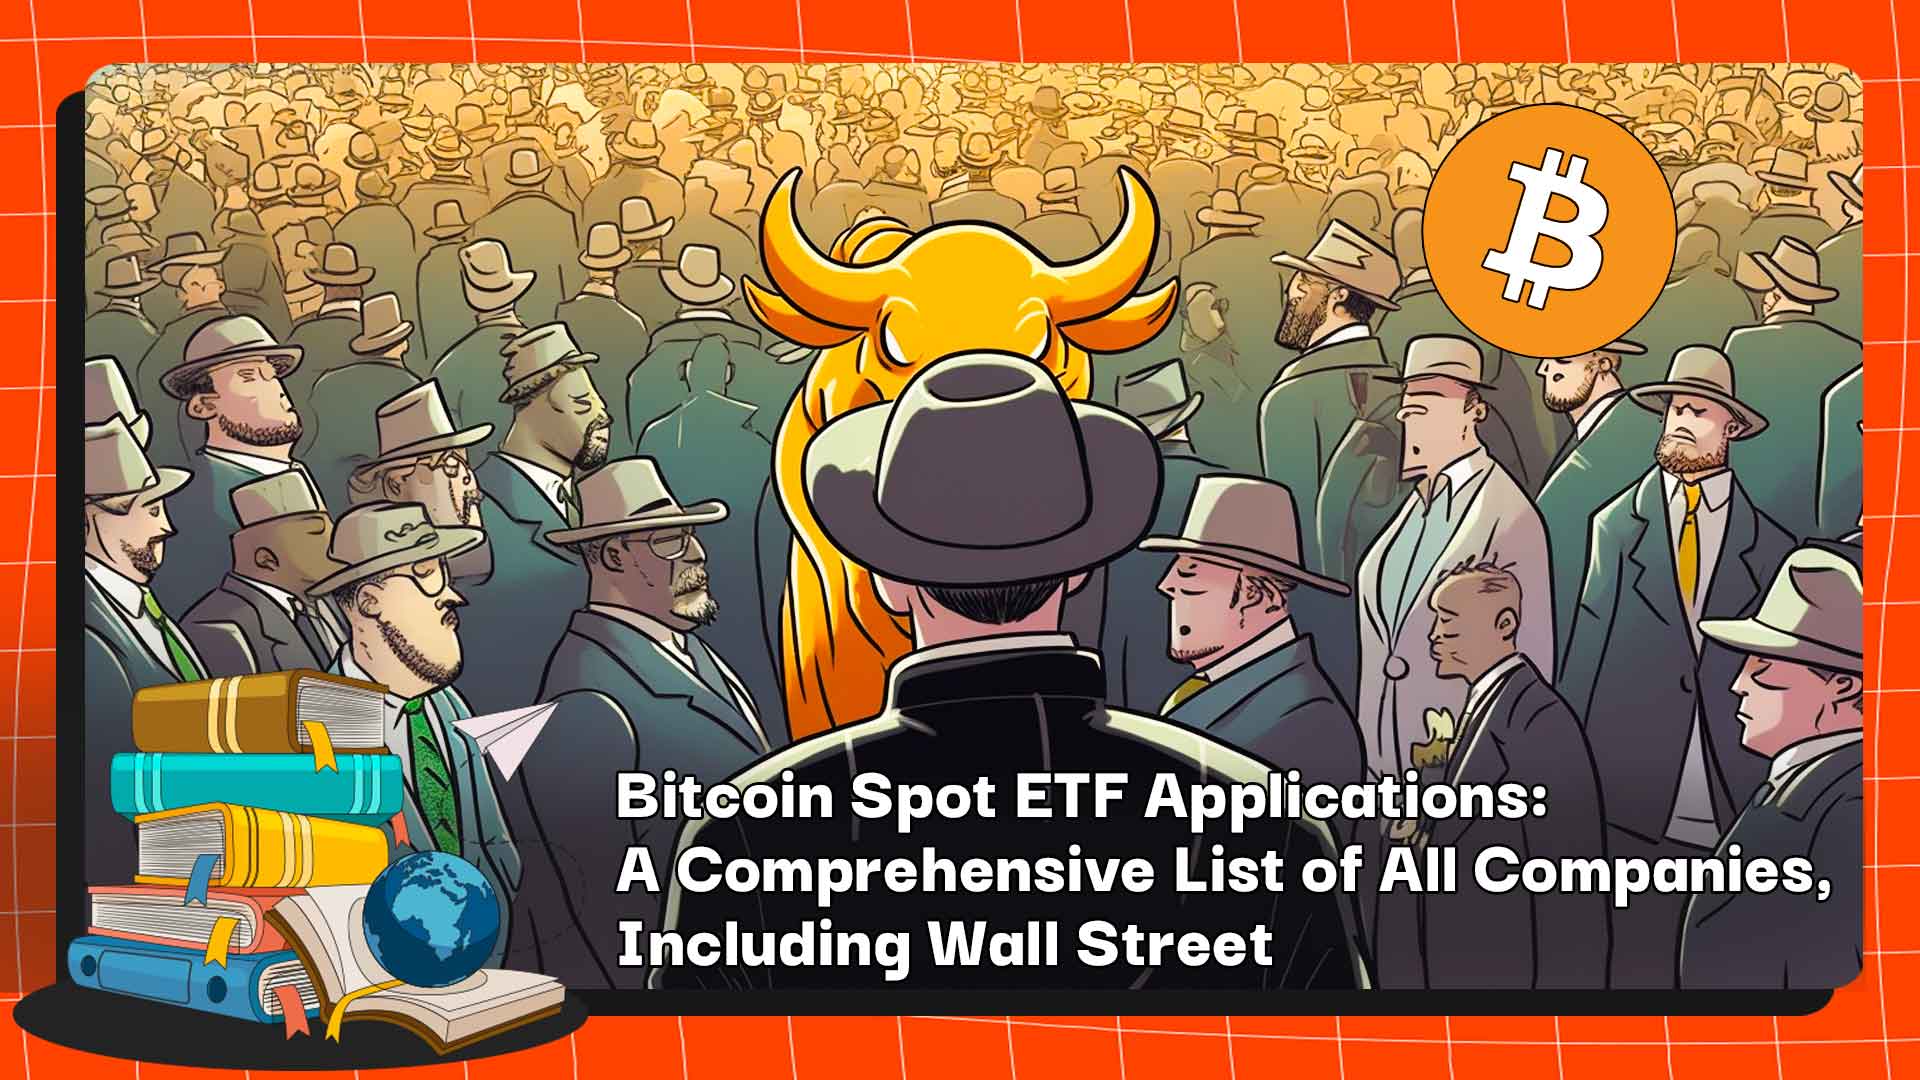 Bitcoin Spot ETF Applications: A Comprehensive List of All Companies, Including Wall Street